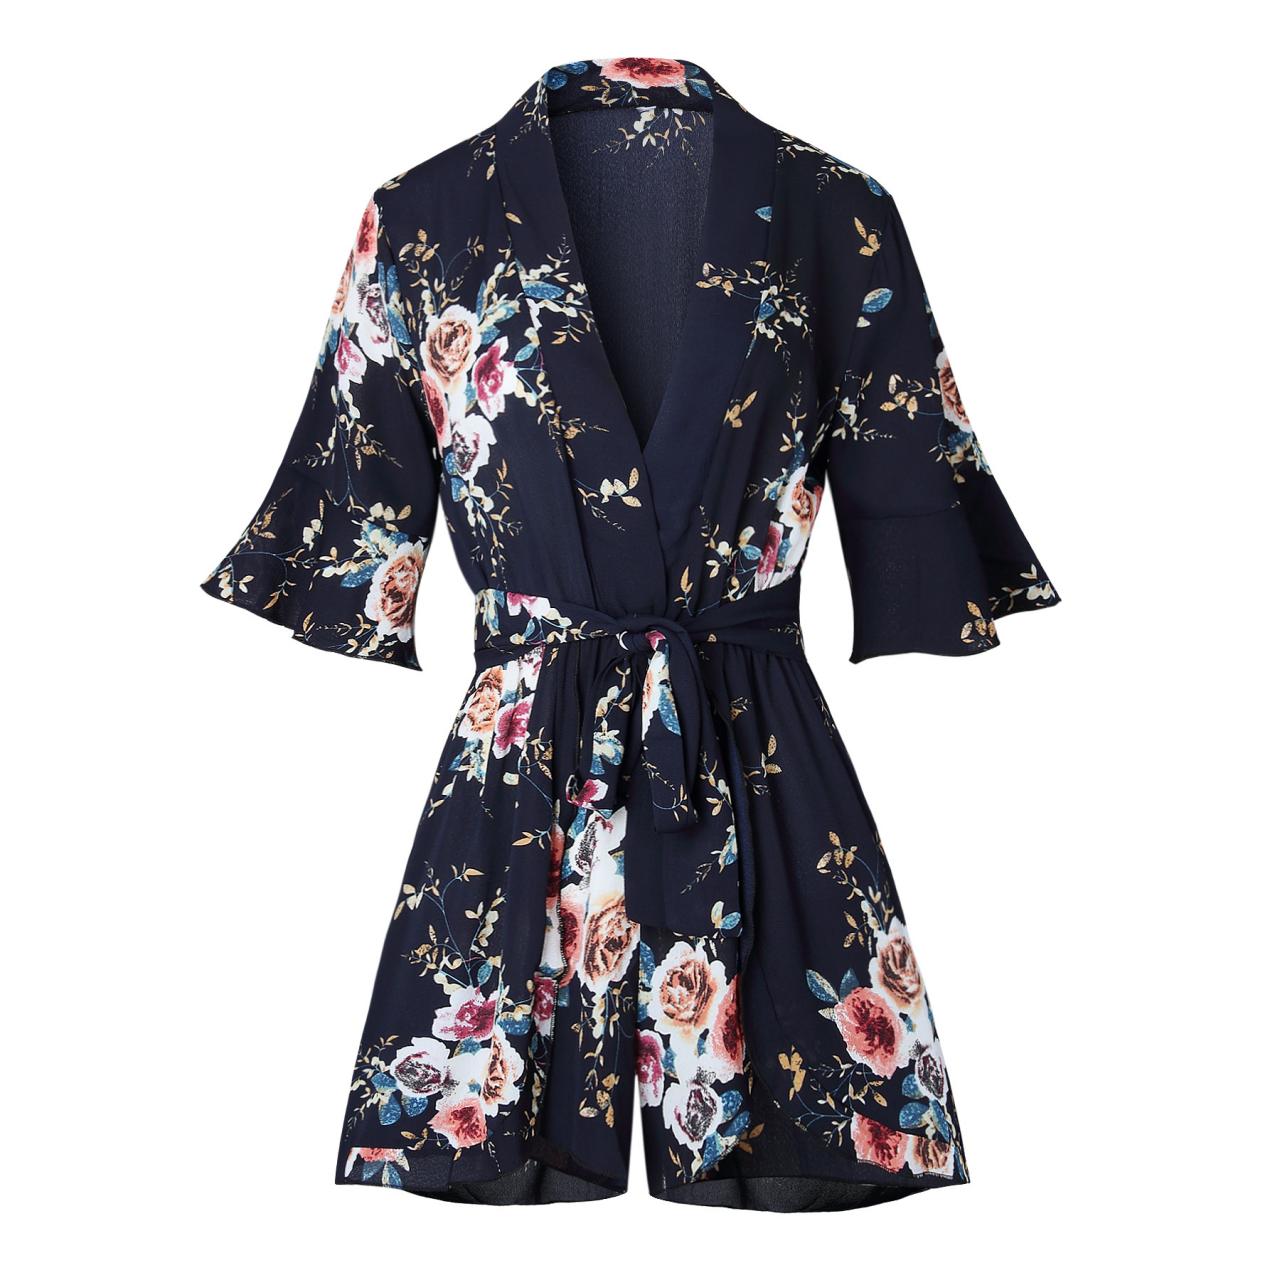 Woman V-neck Fashion Summer Floral Print Rompers (3 Colors)